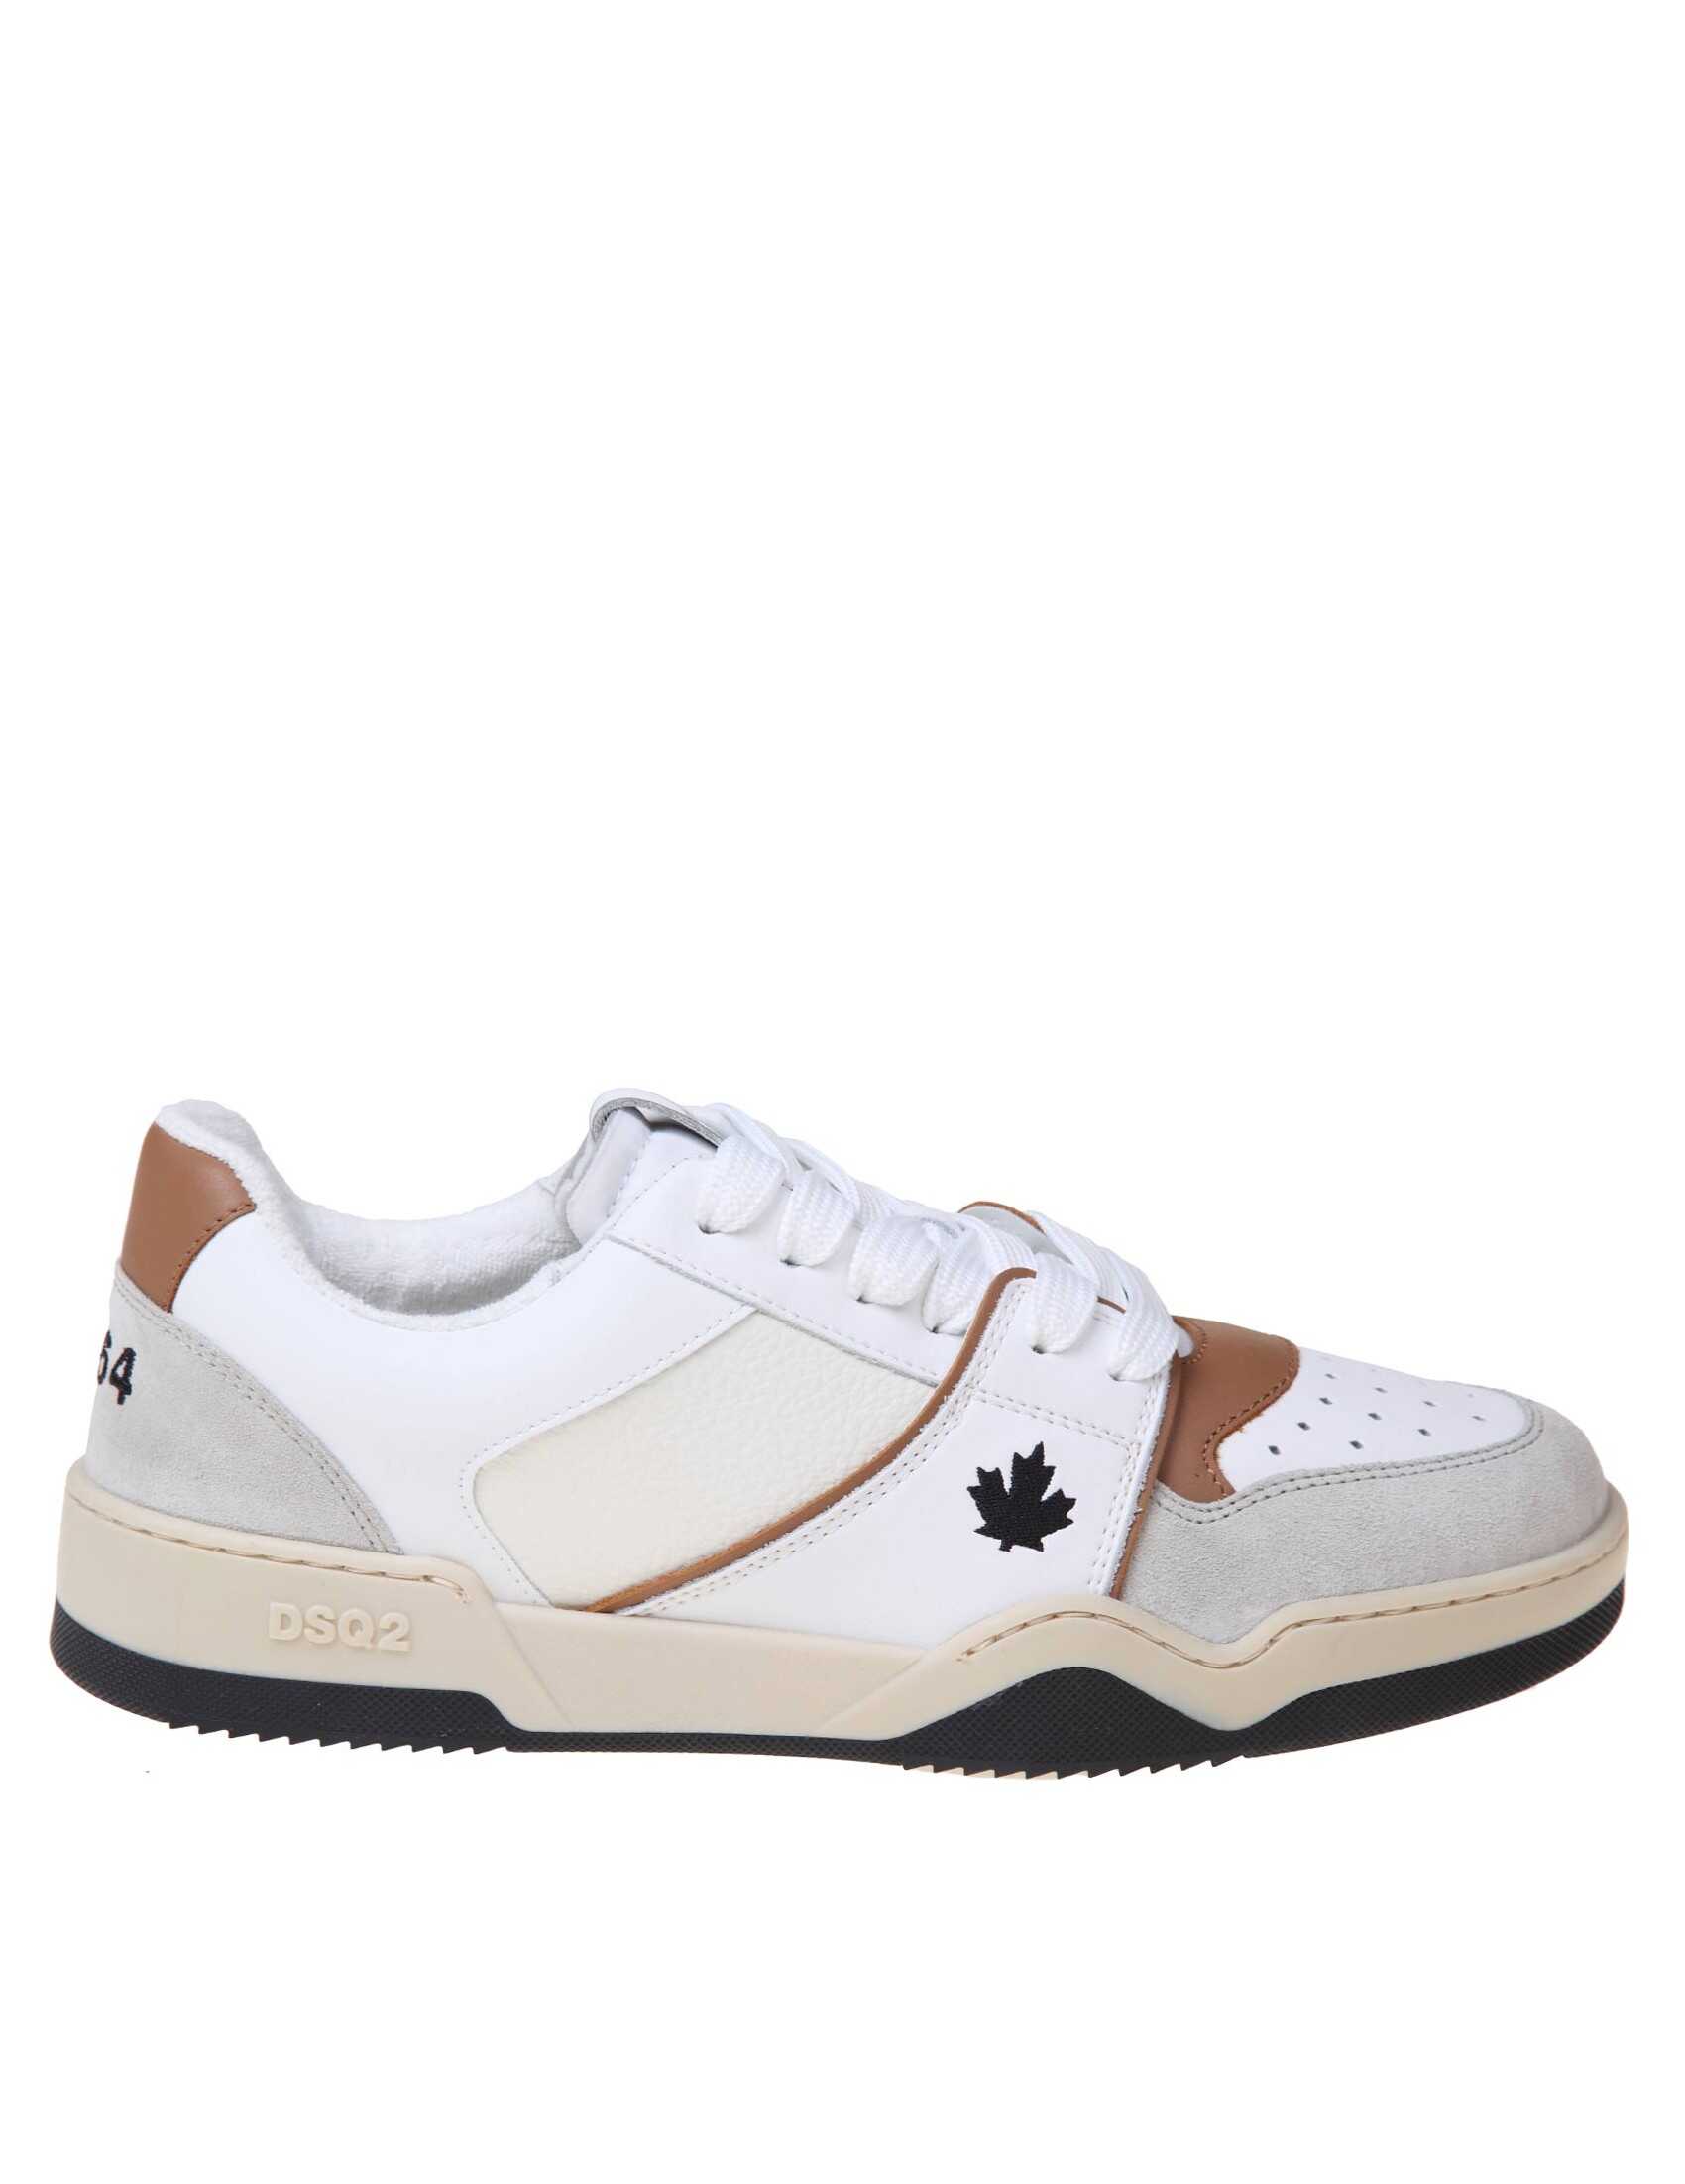 DSQUARED2 Dsquared2 white and cognac leather and suede sneakers White